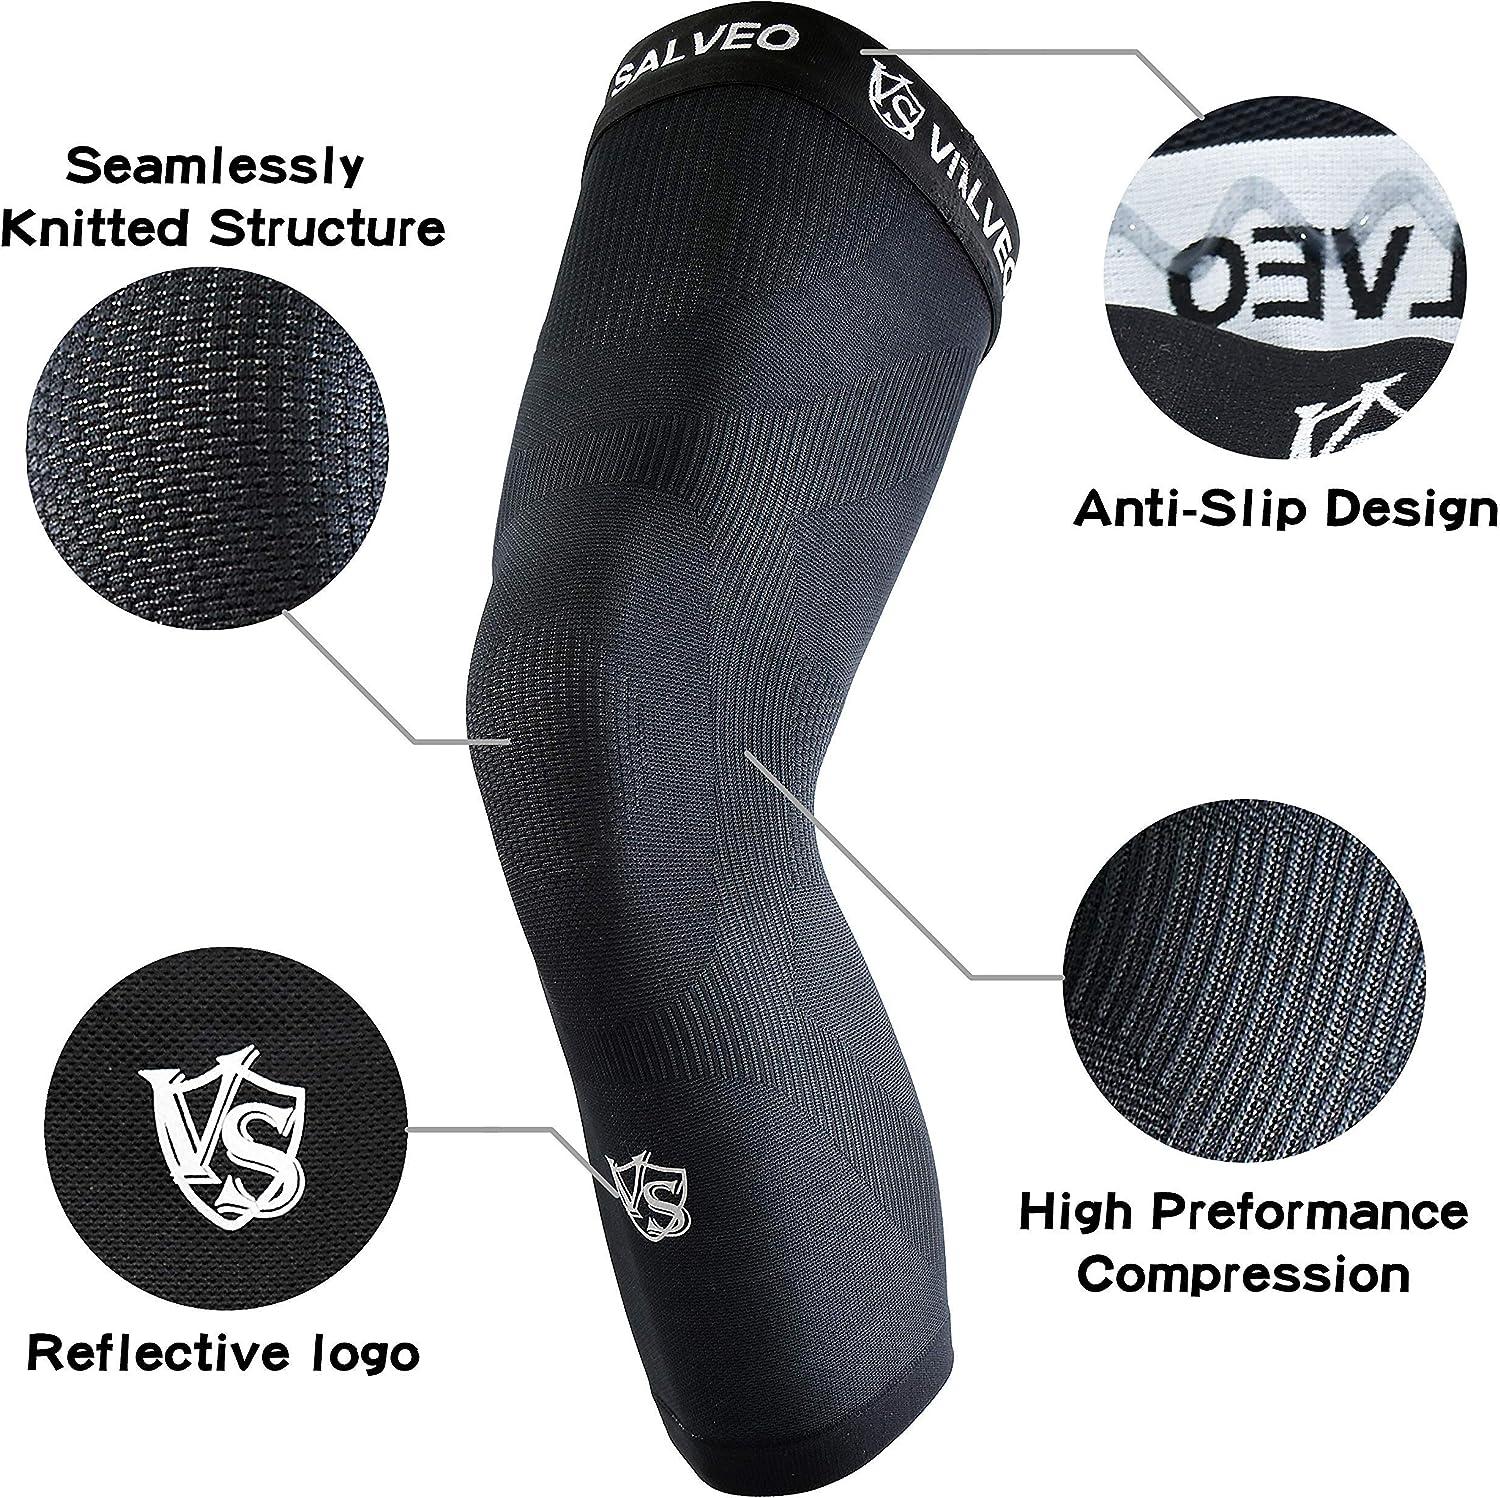 VITAL SALVEO-Sports Outdoor Compression Long Knee Sleeve Leg Support knee  brace Thin Light undersleeve Germanium Recovery Running Basketball (1 PC)  X-Large X-Large (Pack of 1)